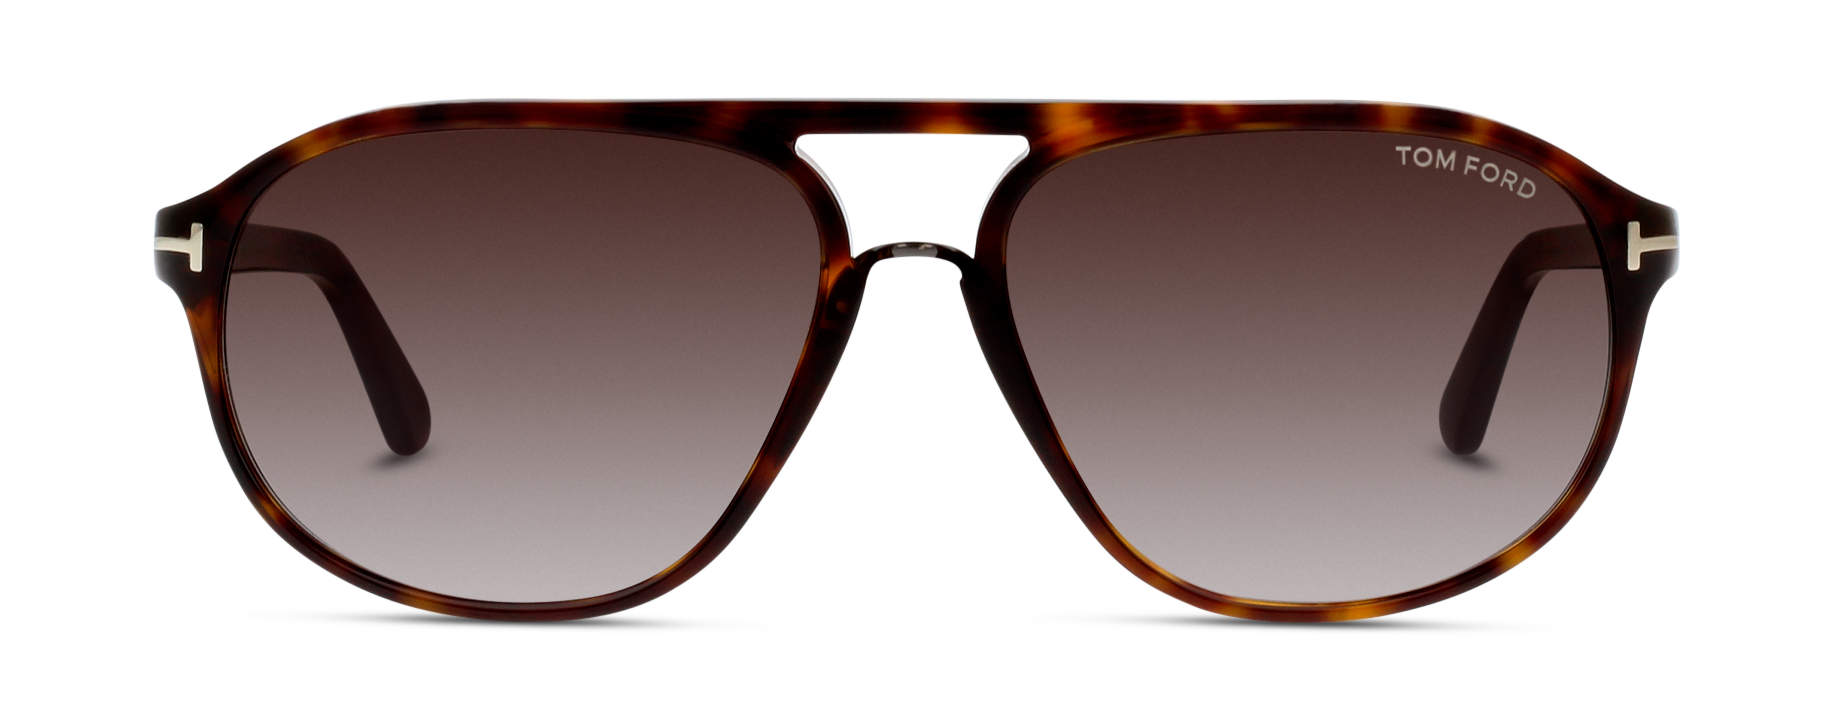 [products.image.front] TOM FORD FT0447 52B